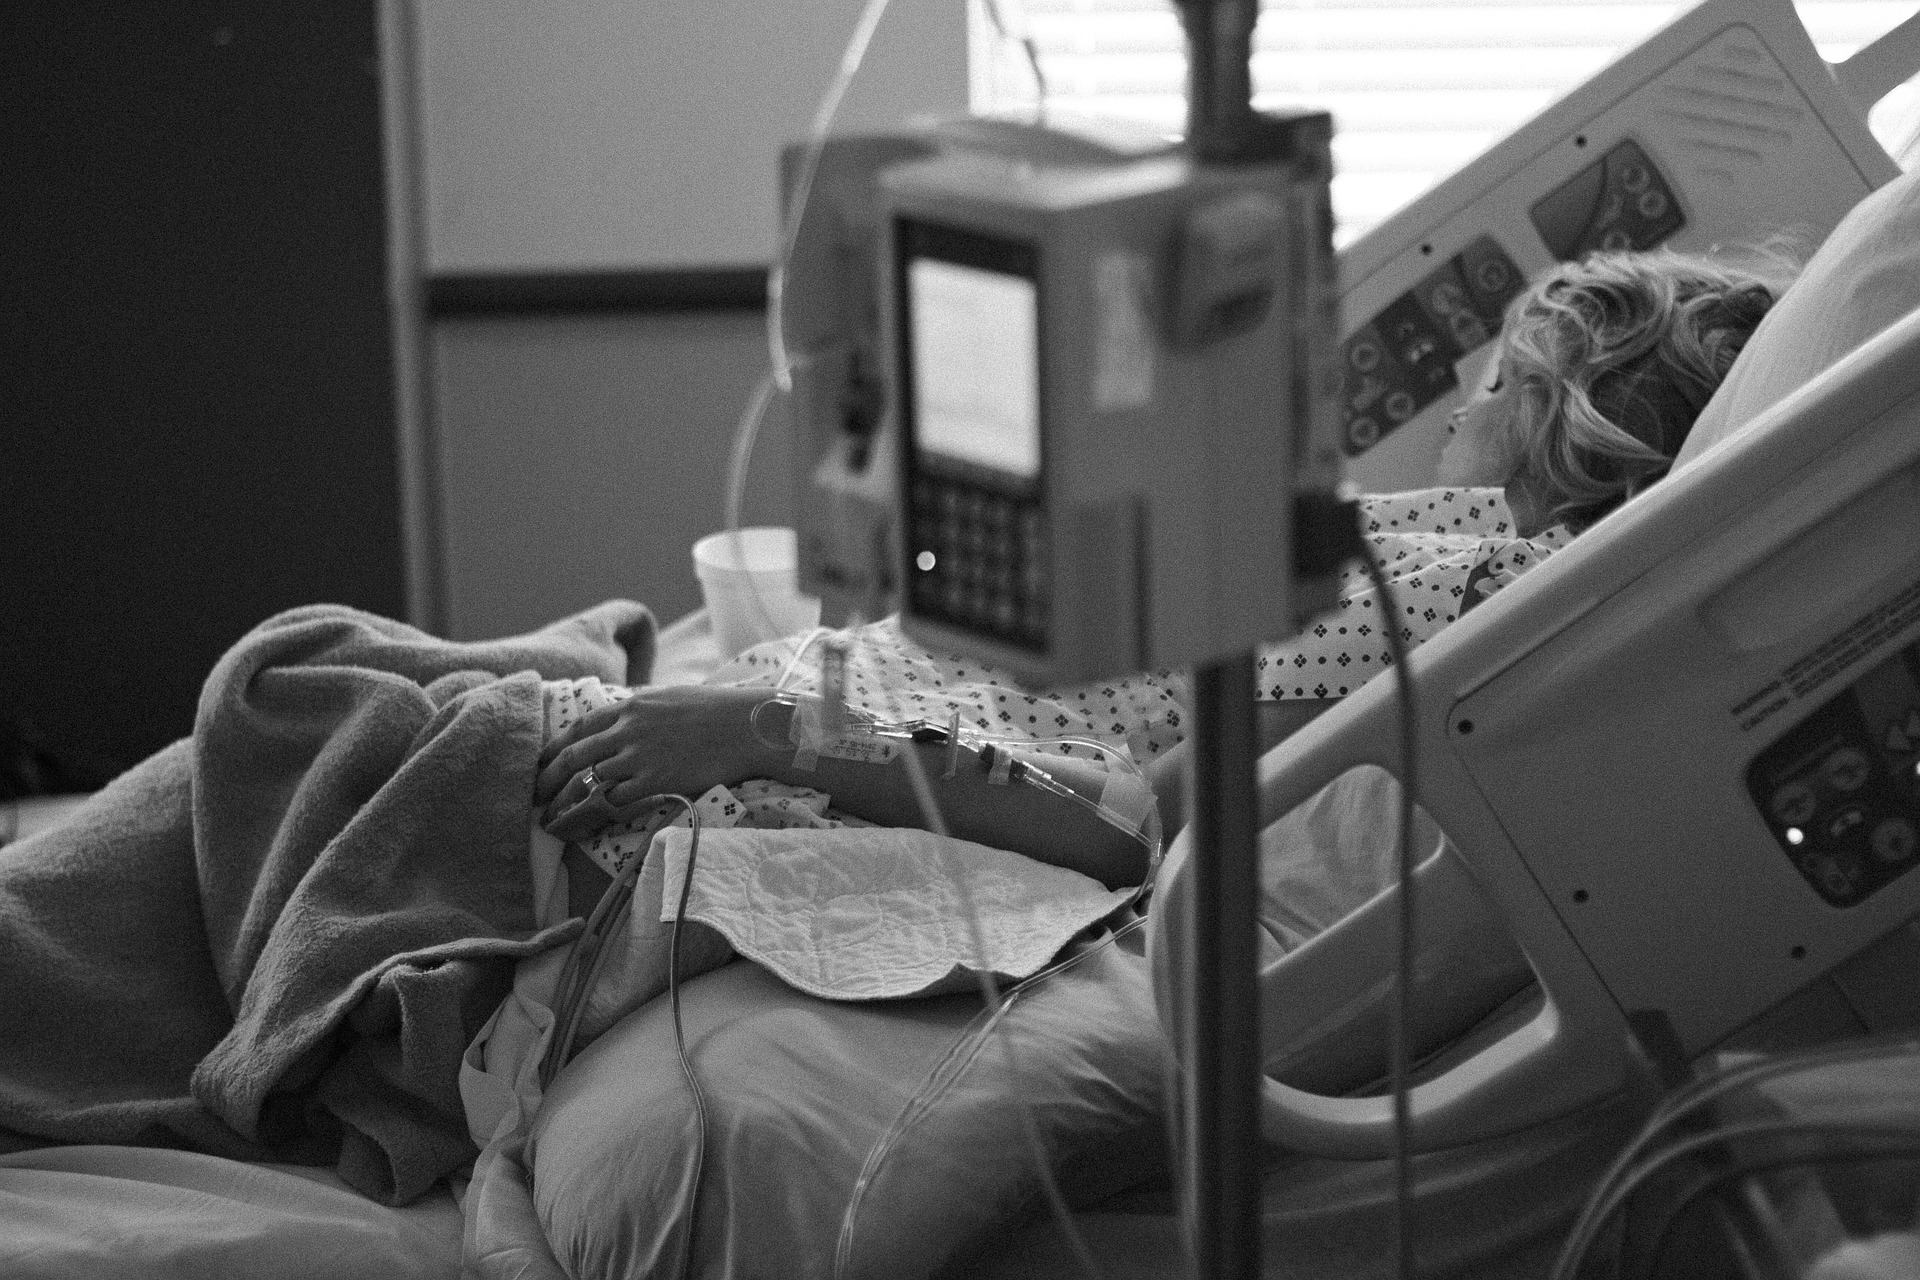 black and white image of a hospital room with a patient in bed- PIXABAY